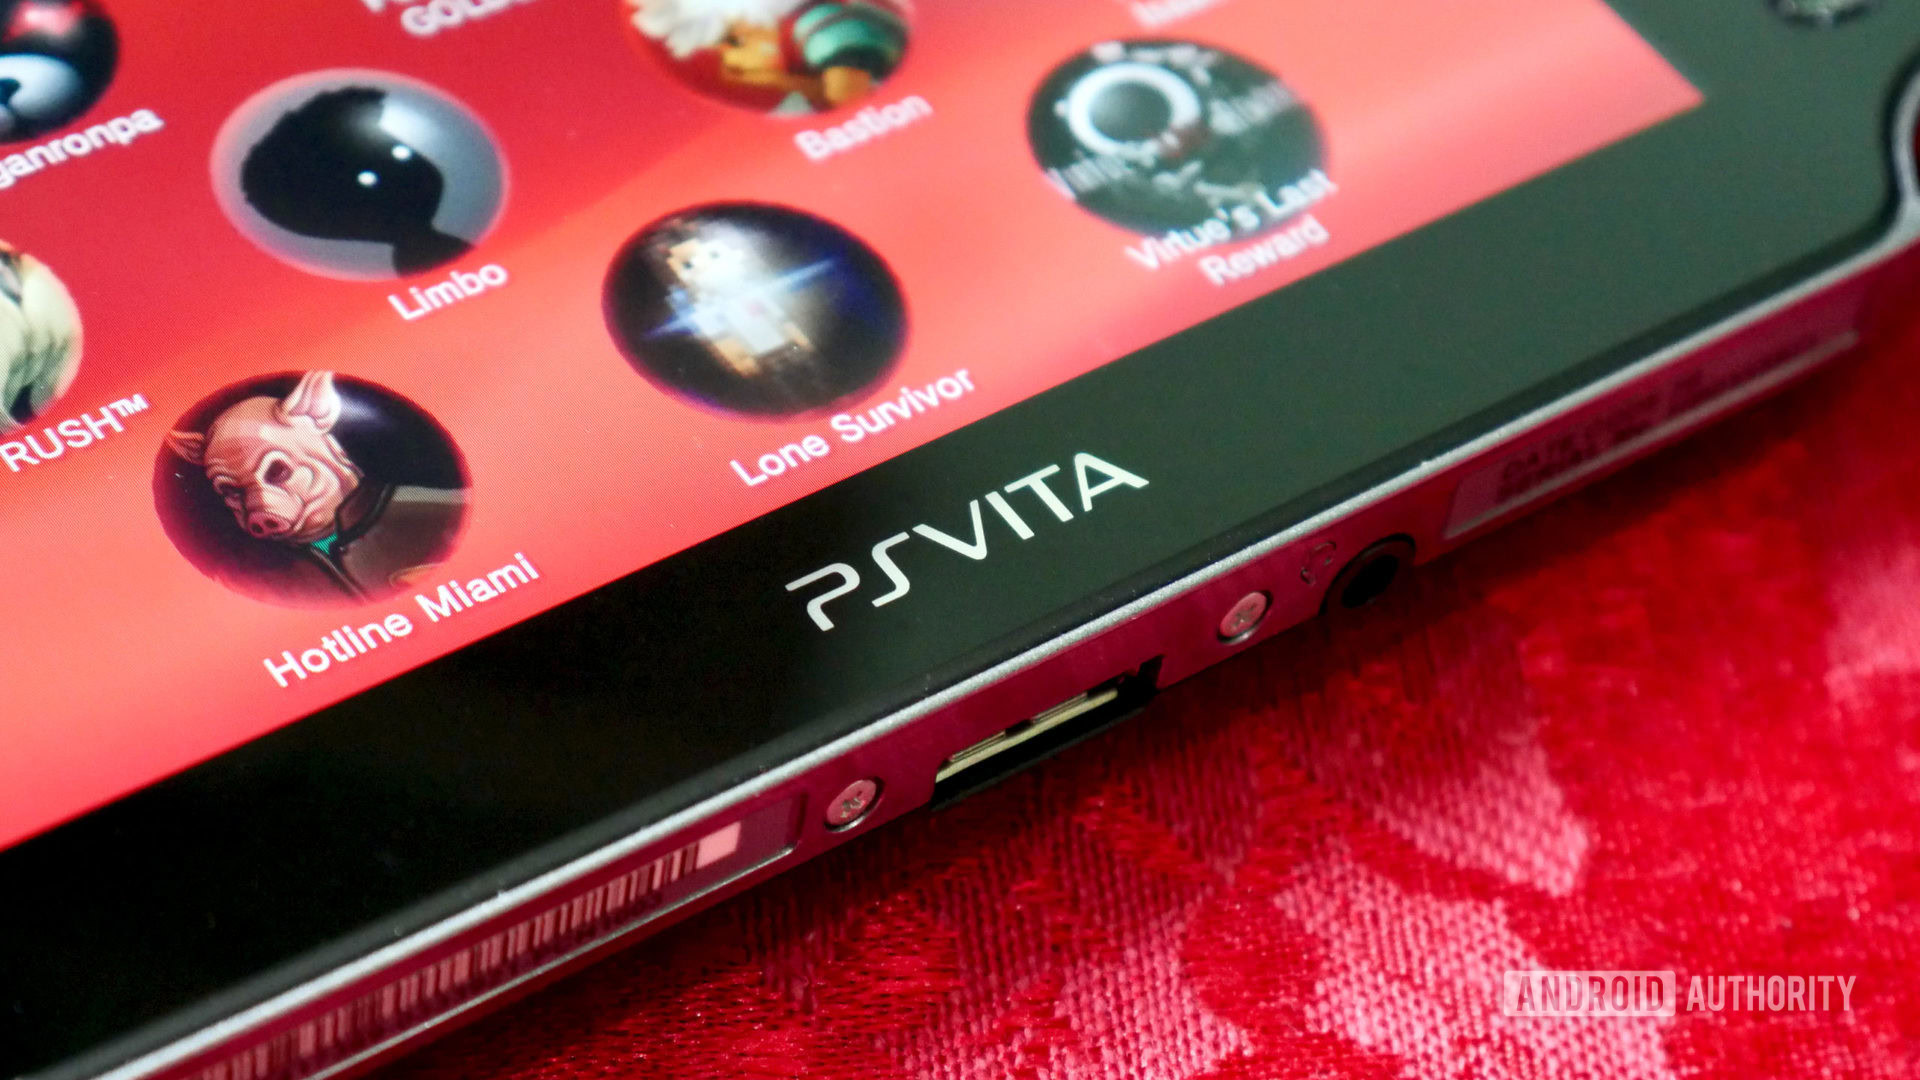 New Playstation Portable How Sony Could Build On The Ps Vita And Psp